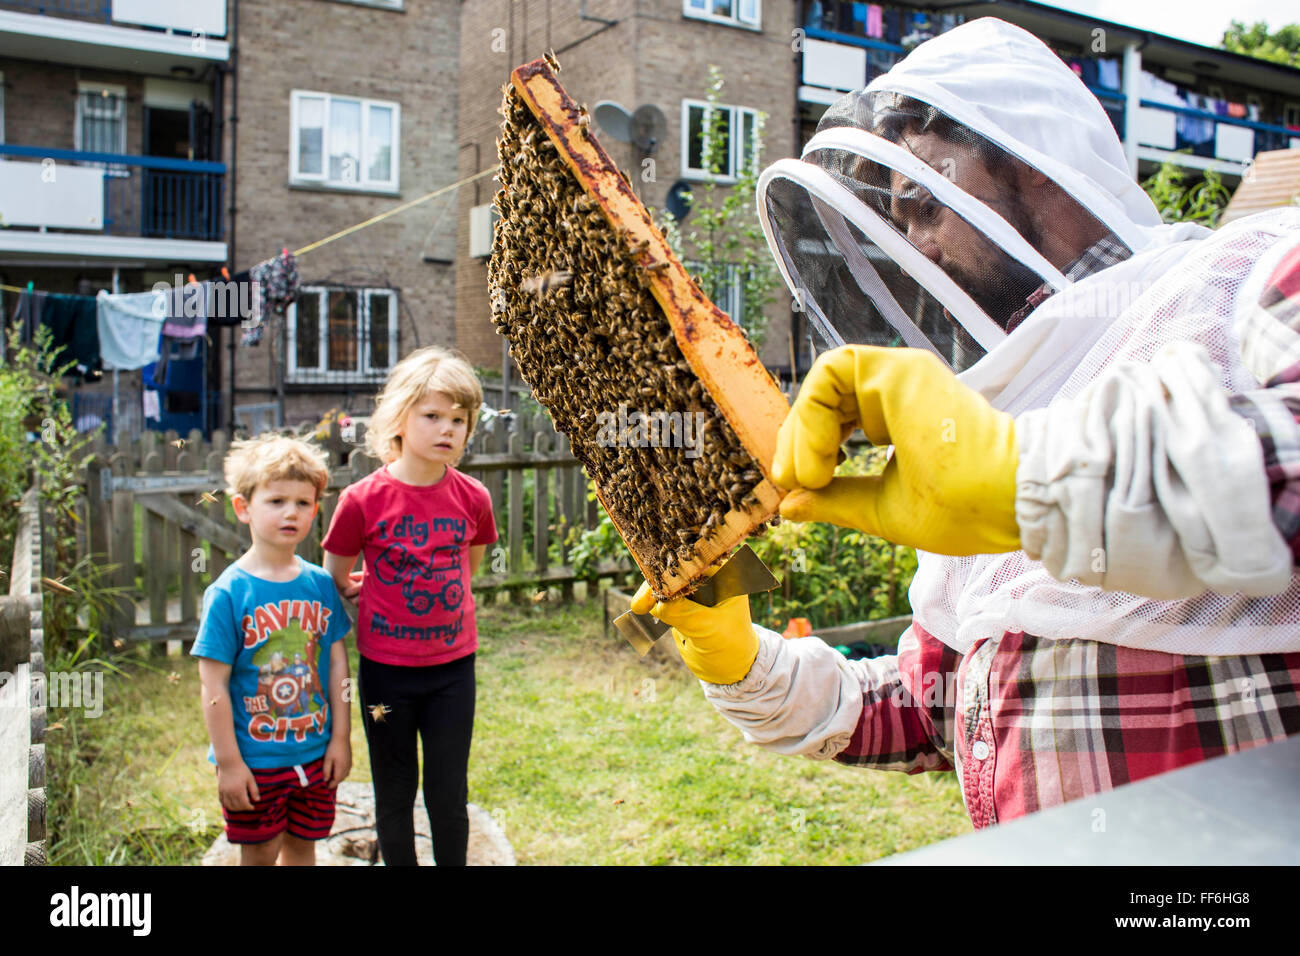 Children watching the bee keeper inspect the honey frames of the bee hives. Urban bee keeping, community garden project, George Downing Estate, Hackney, East London. Stock Photo